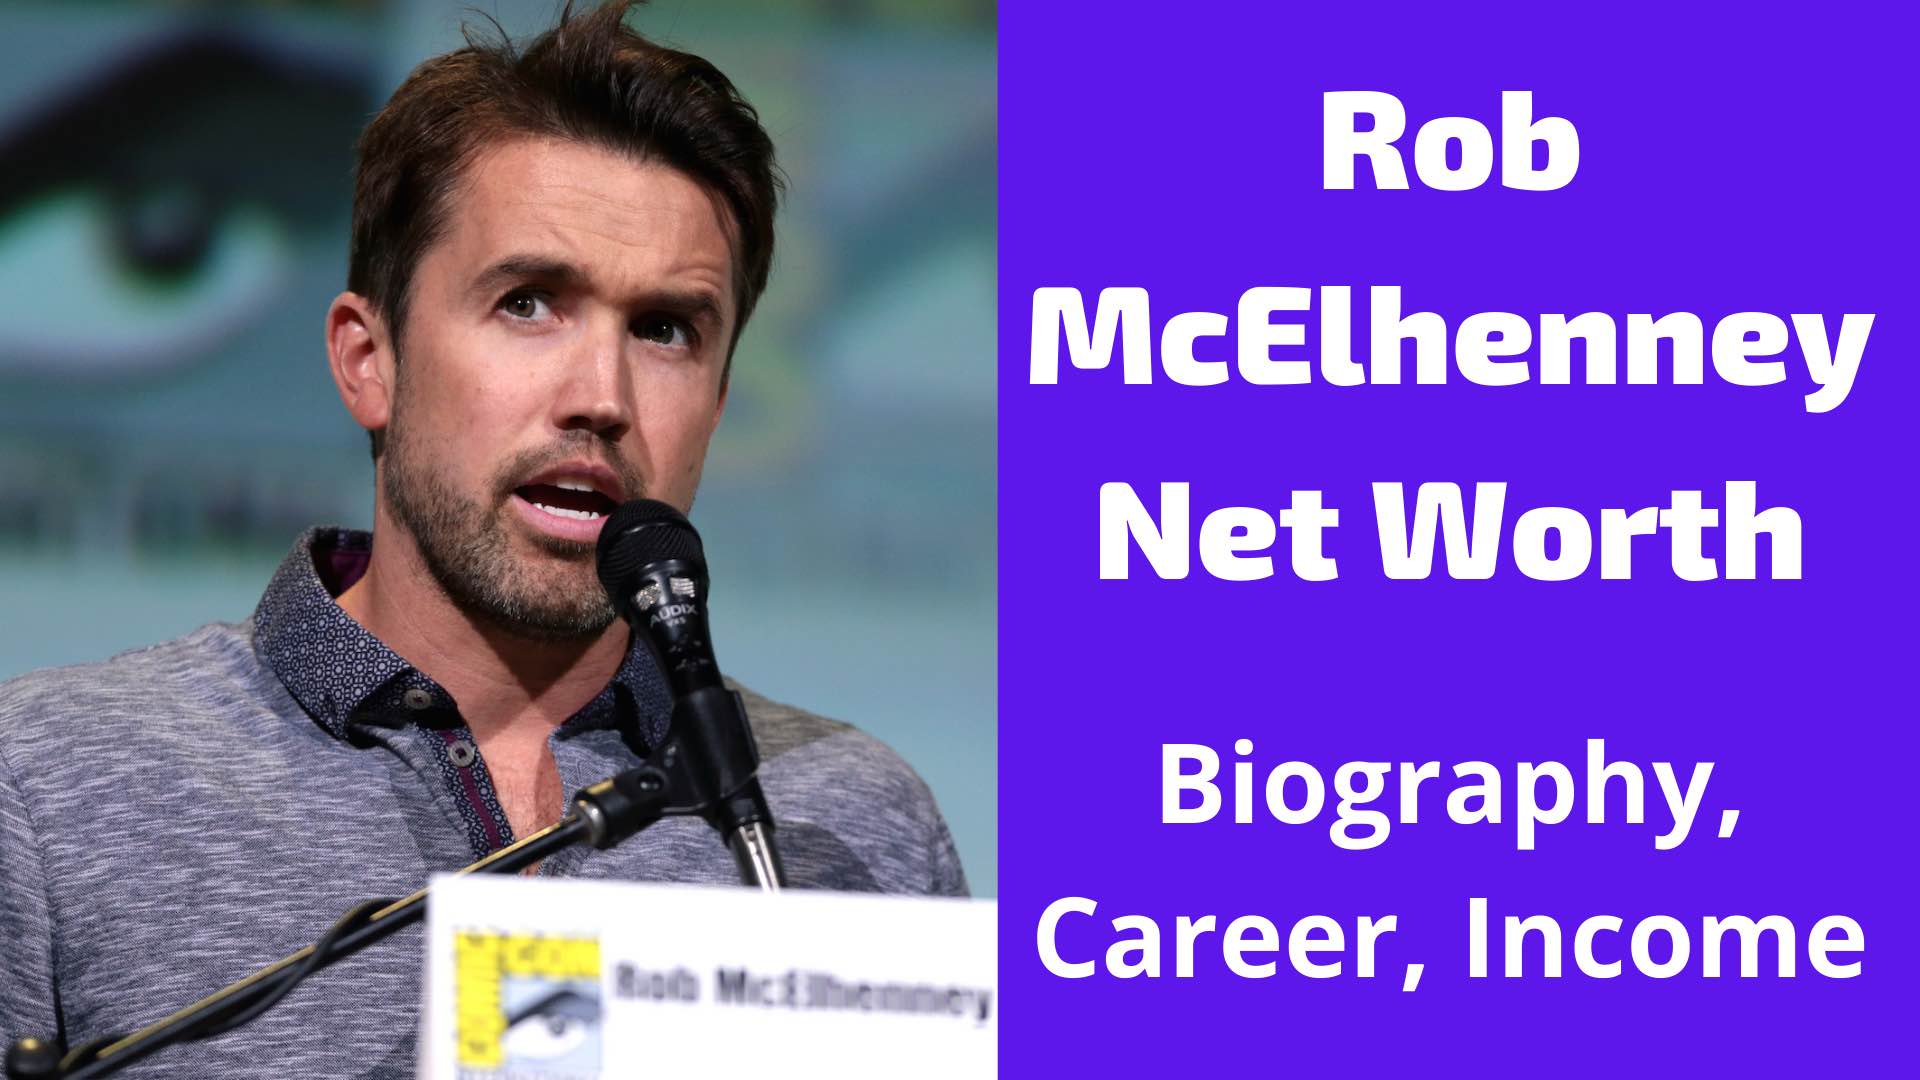 Inside Rob McElhenney's Fortune: A Deep Dive into His Net Worth